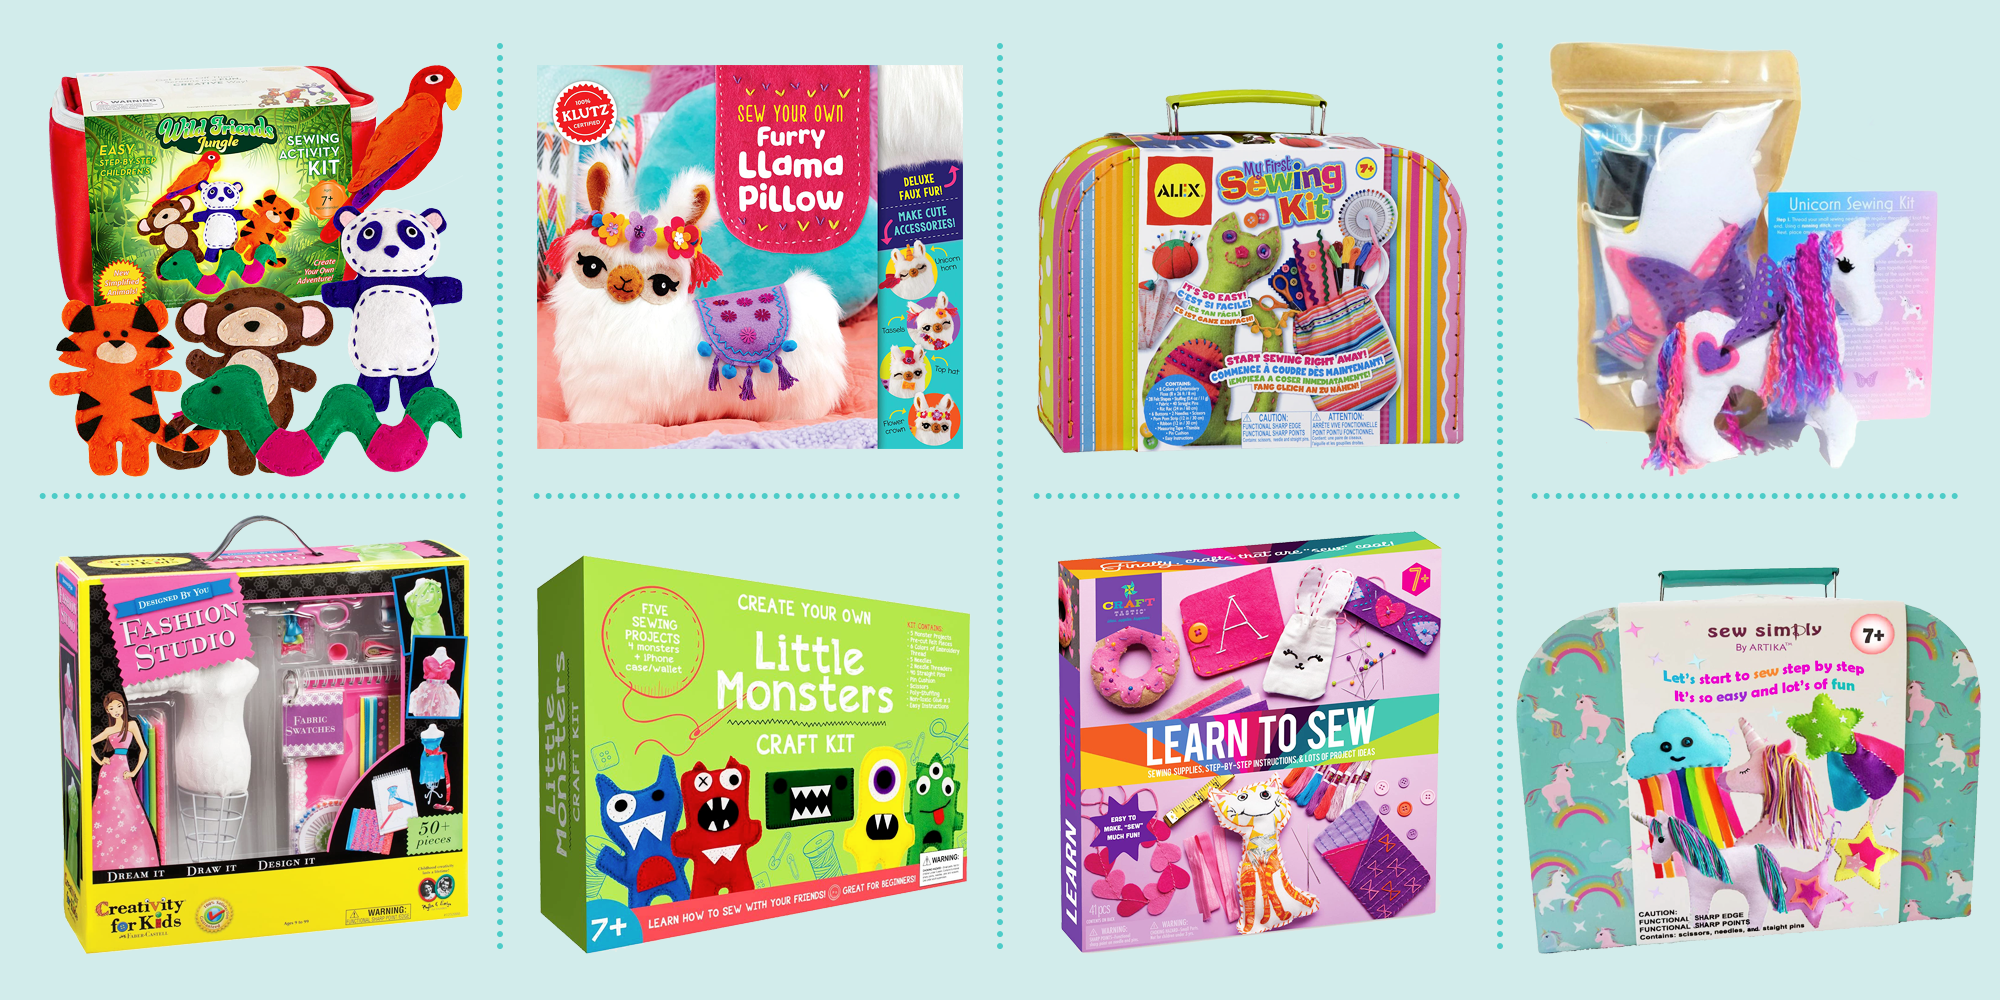 Great Choice Products Sewing Kit For Kids, Fun And Educational